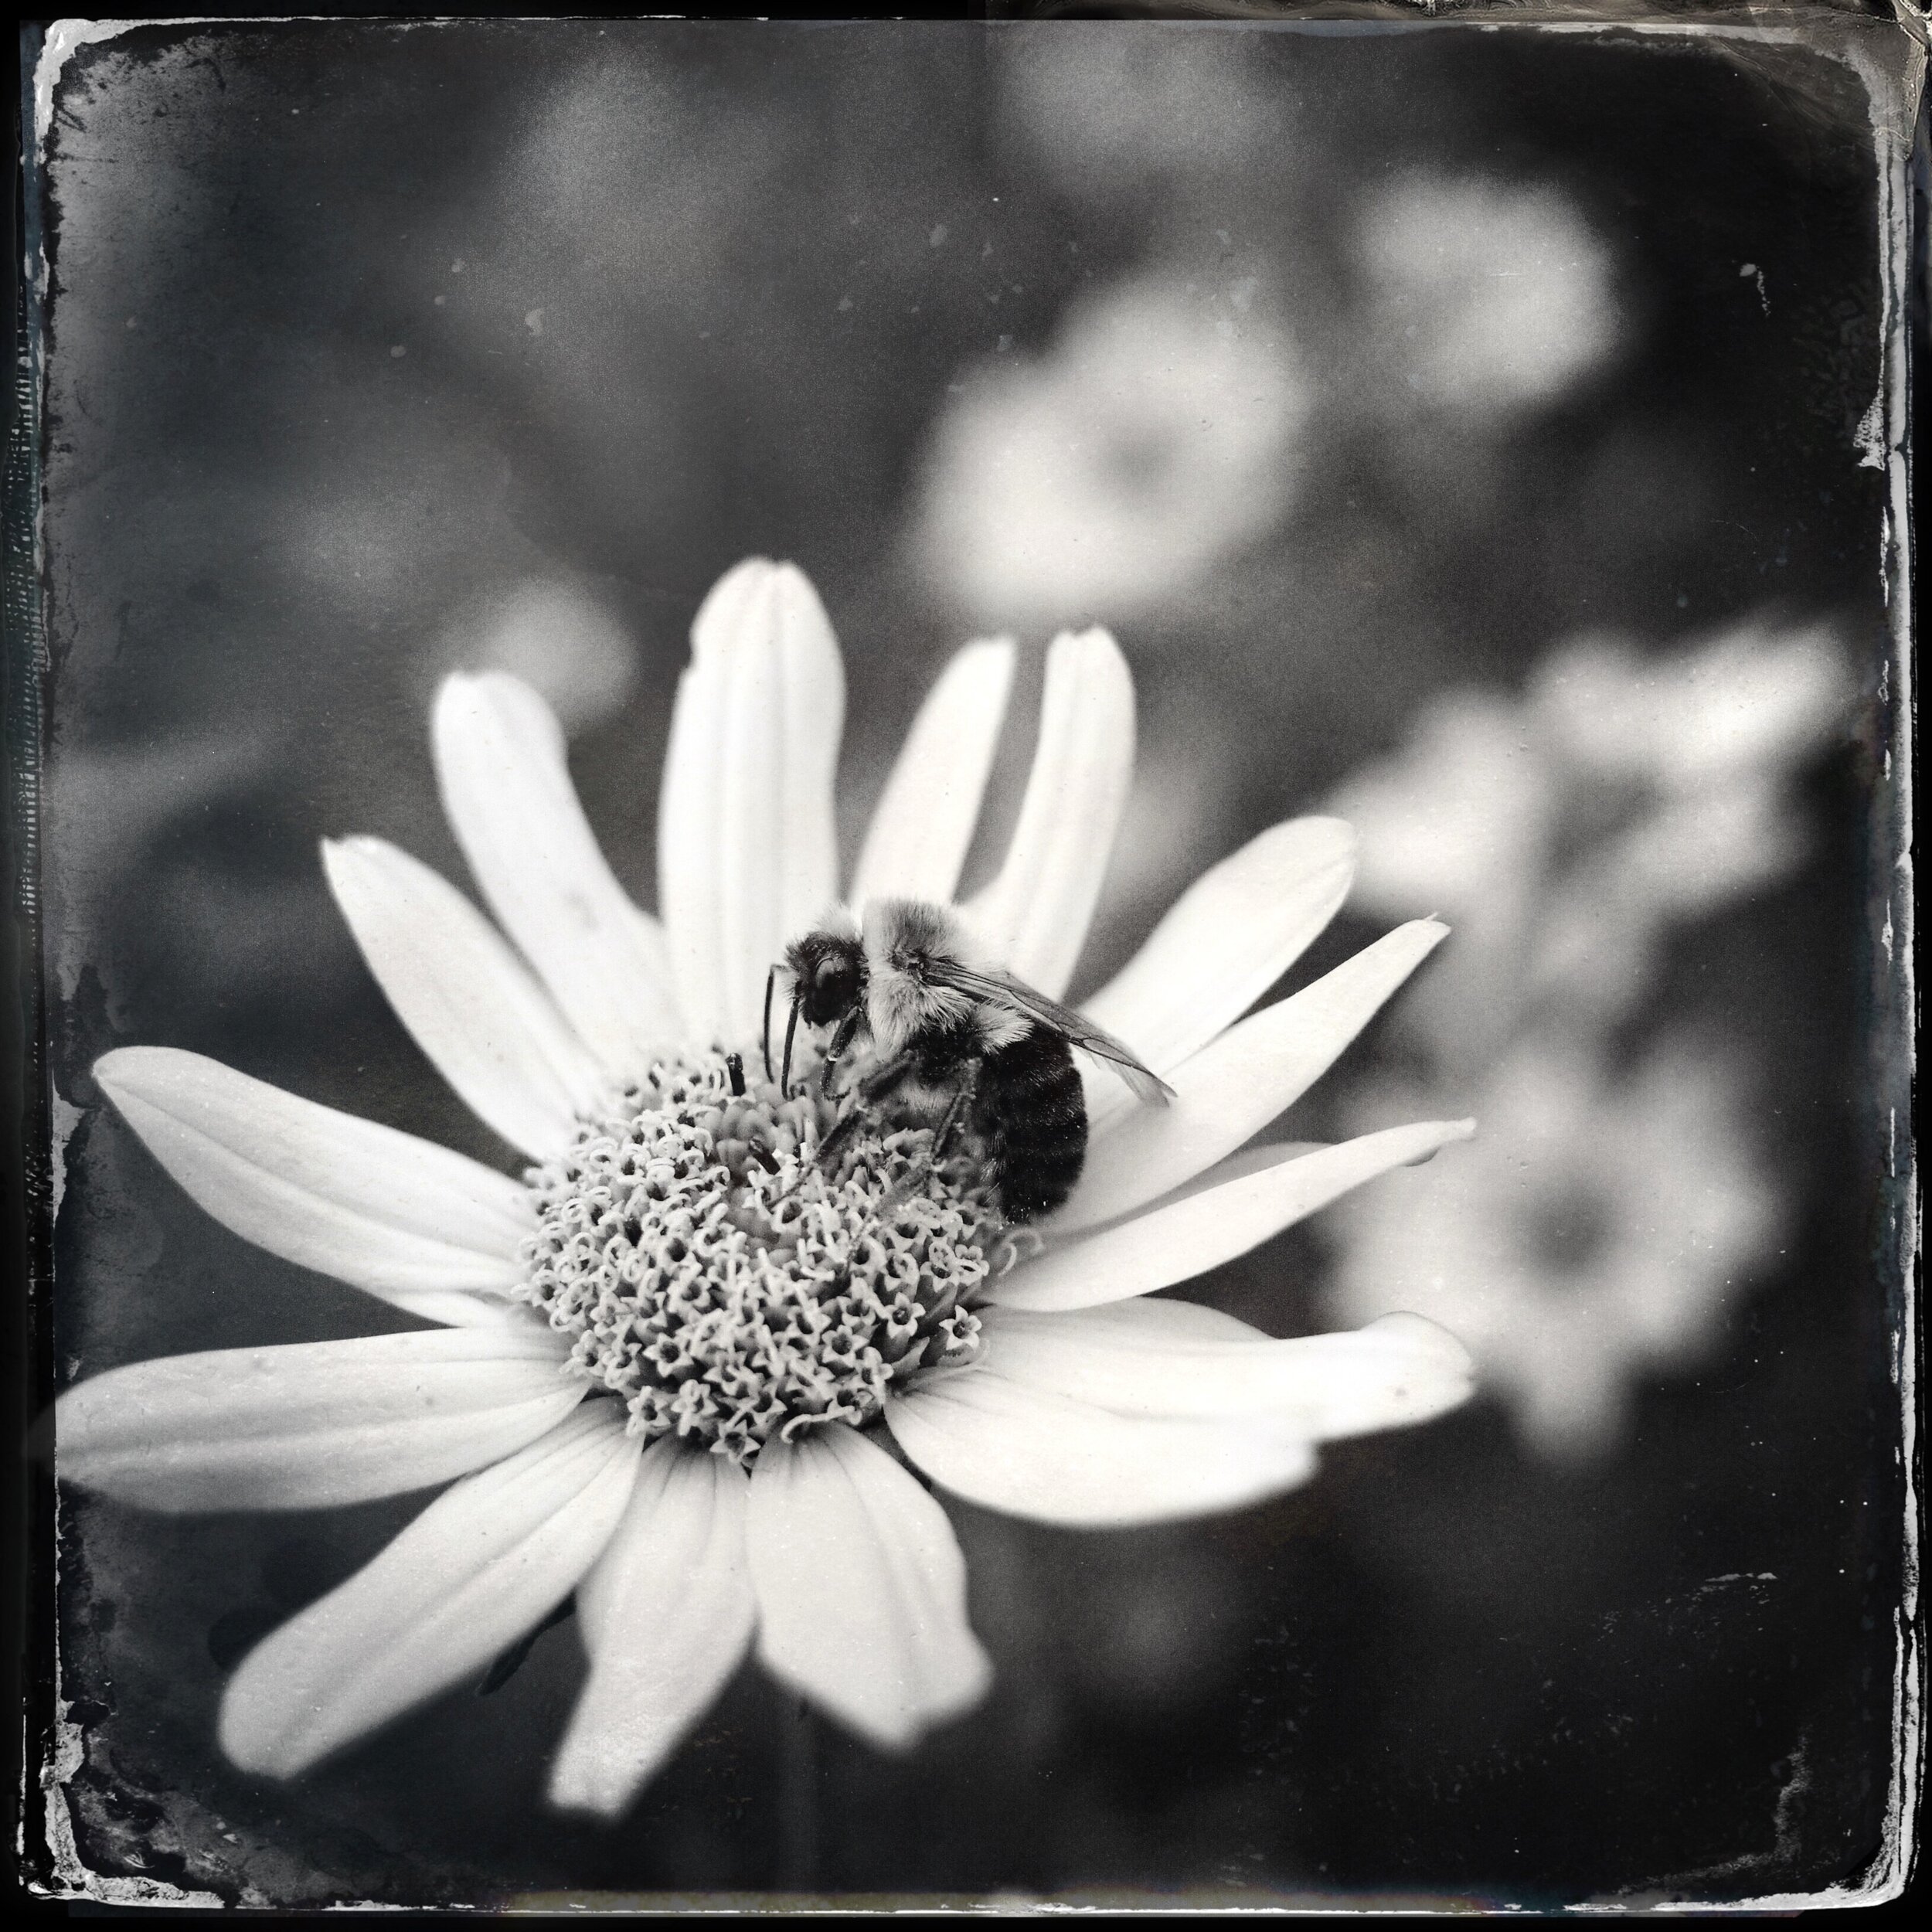 A busy bee has no time for sorrow